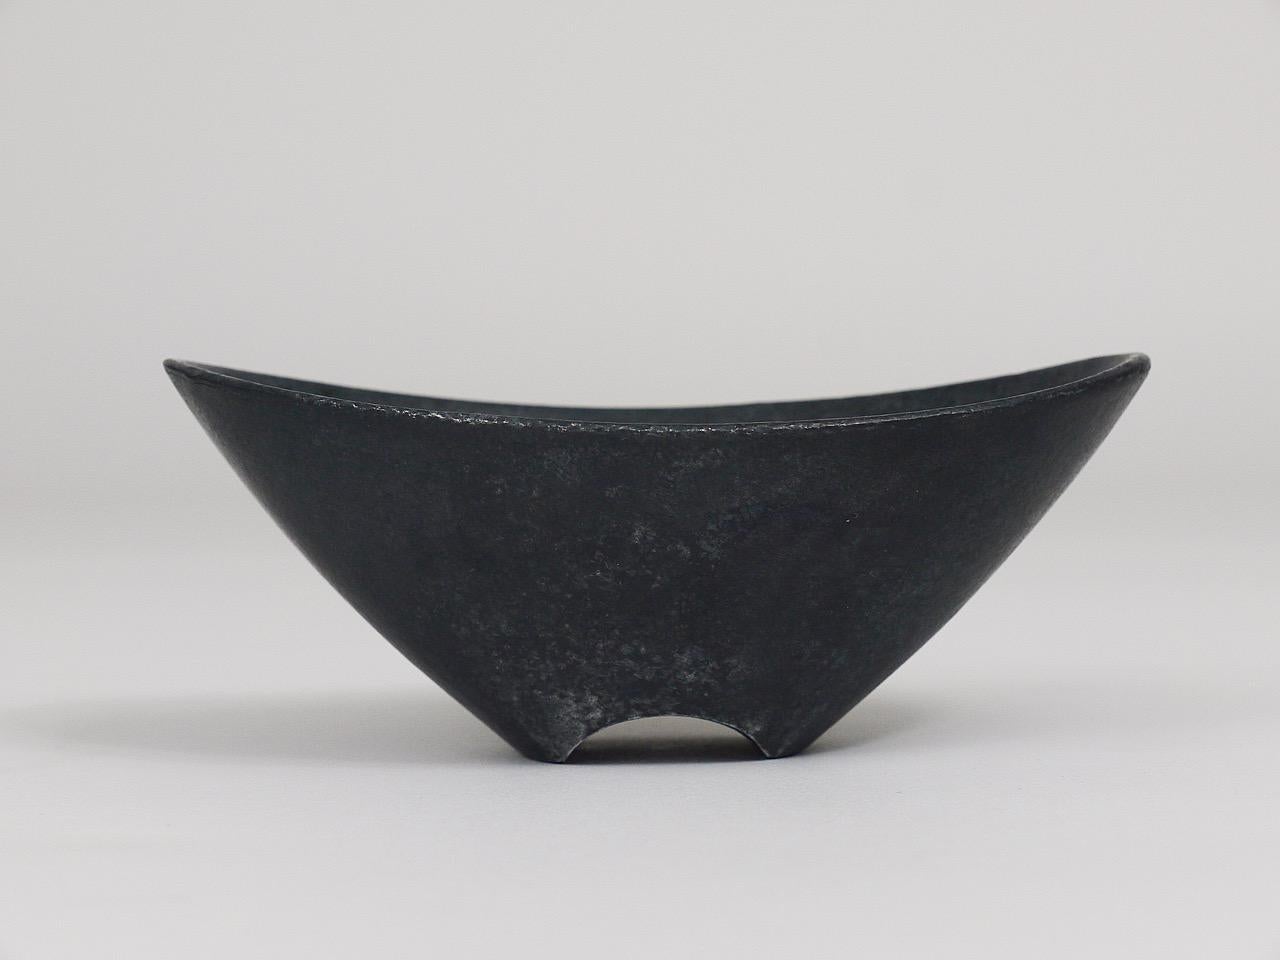 A beautiful modernist metal bowl or ashtray, made of grey or black cast iron from the 1950s. Designed and manufactured by Carl Aubock in Austria. In very good condition.